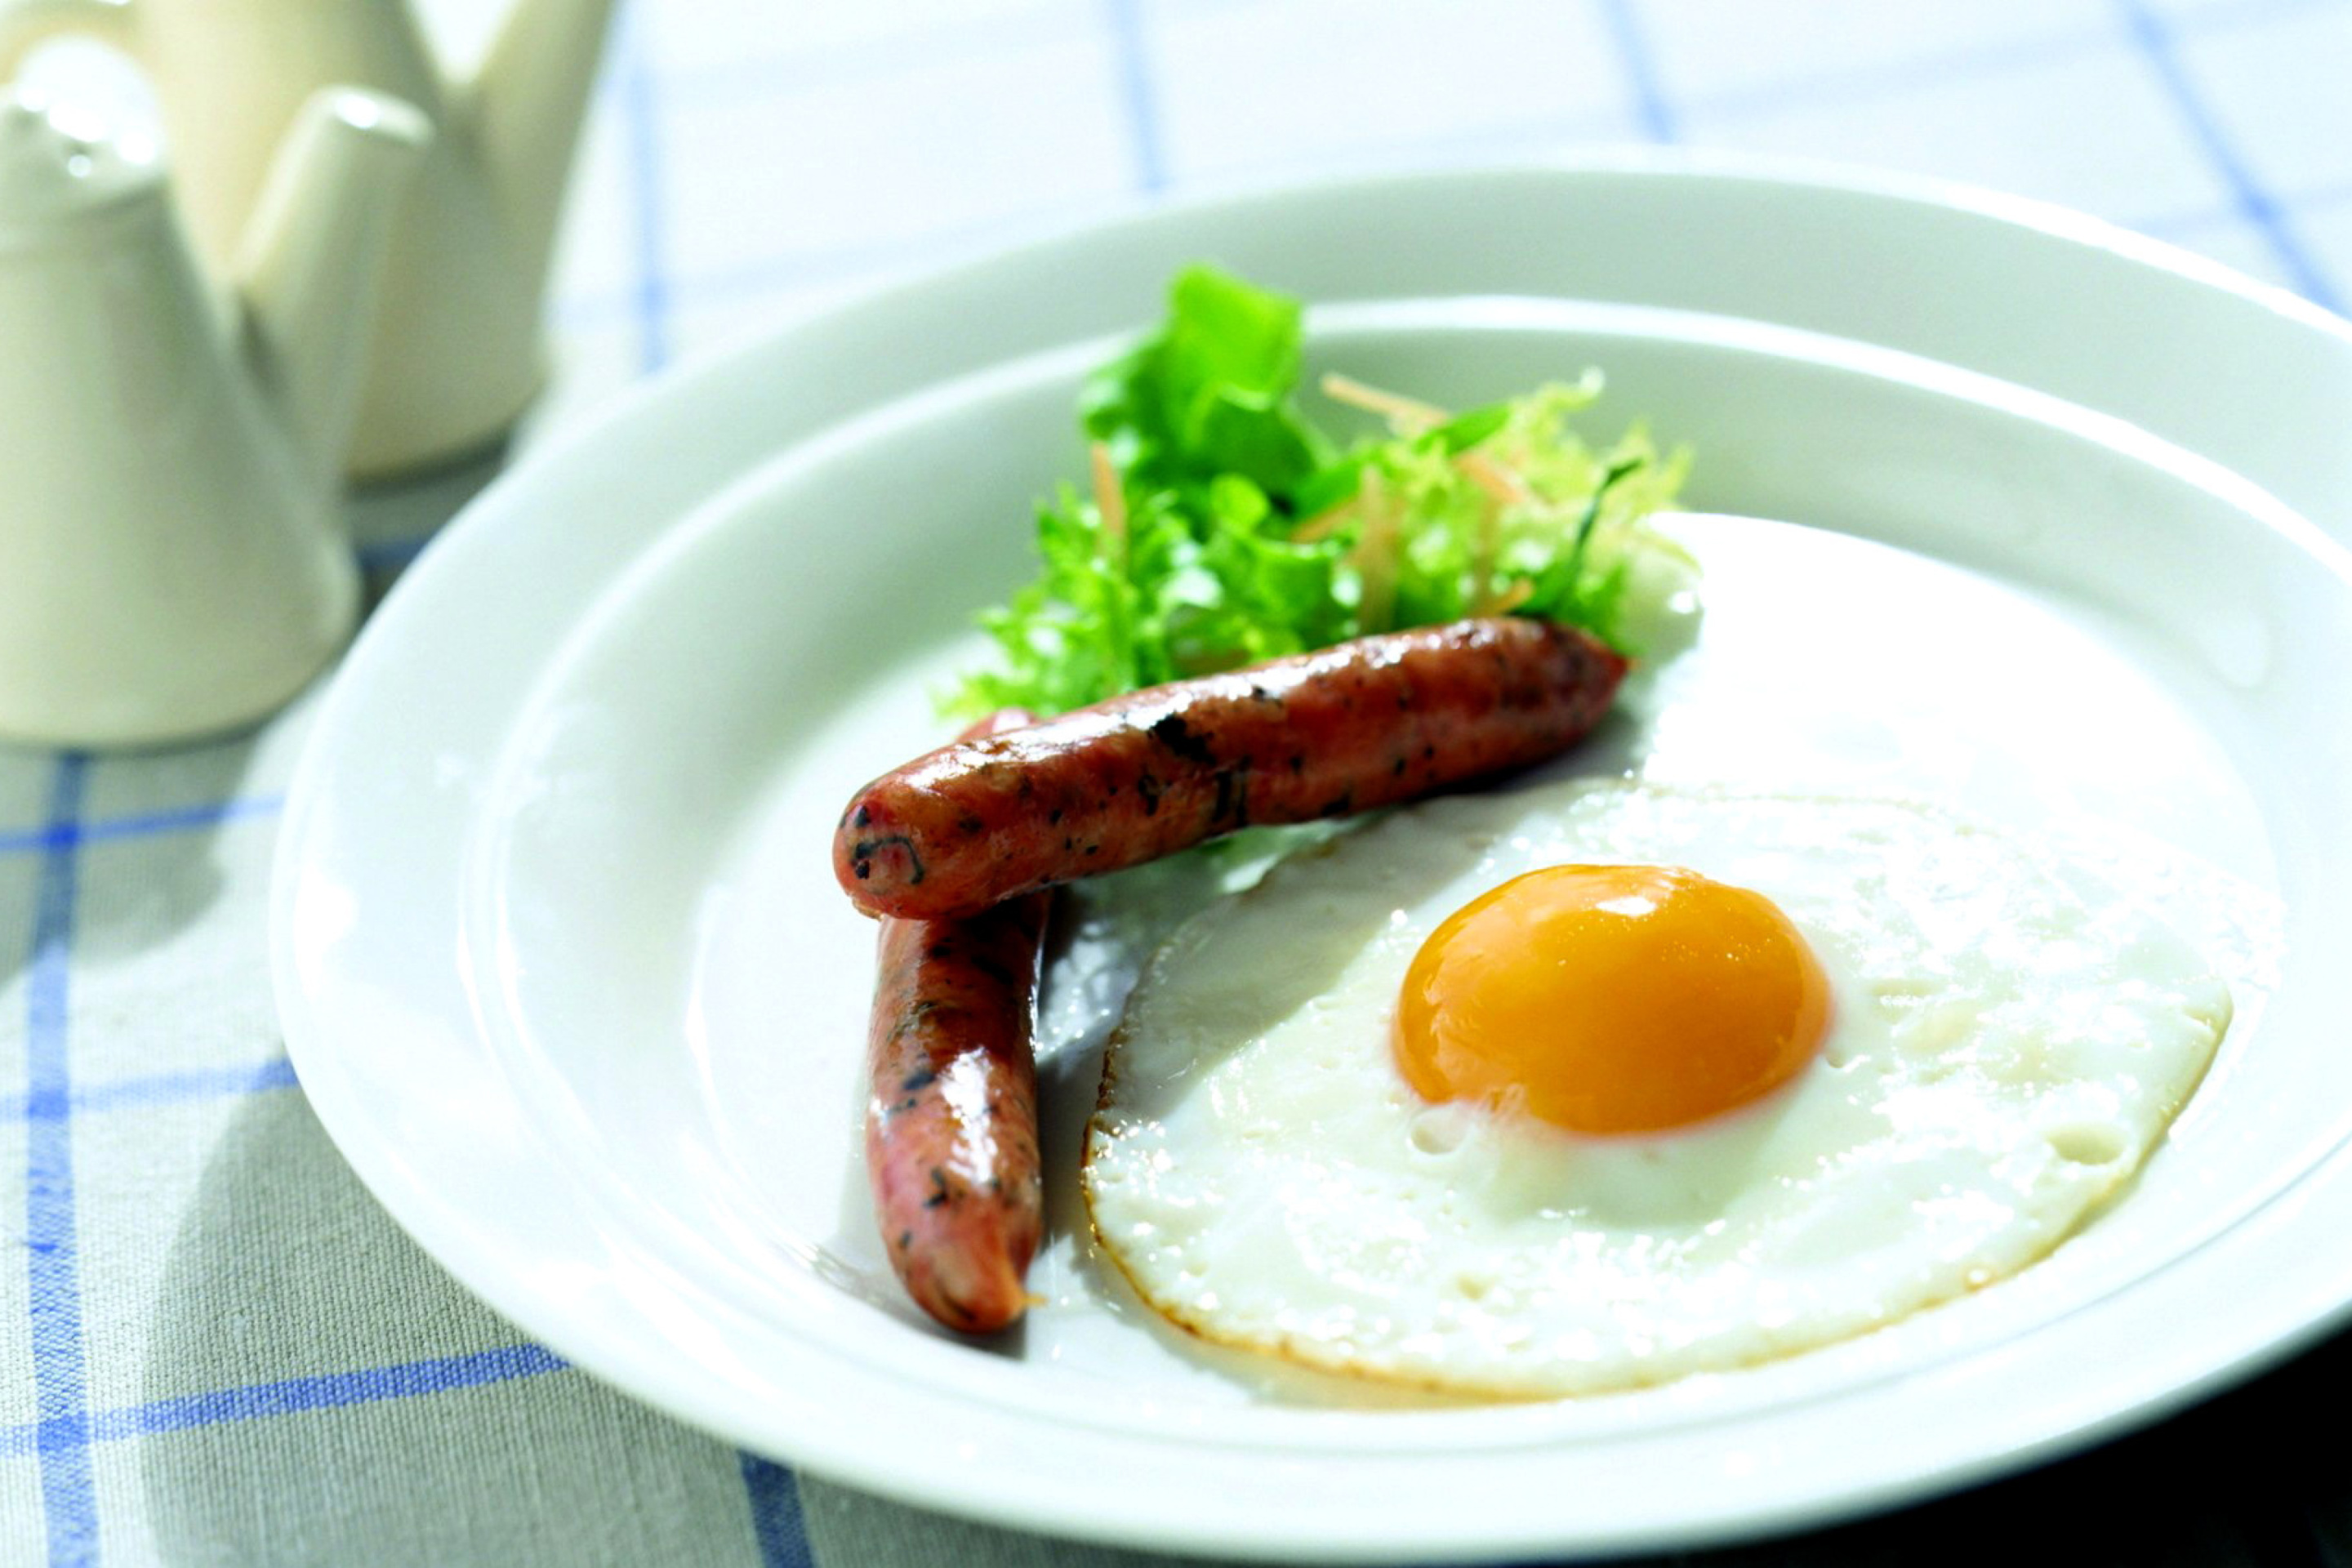 Breakfast with Sausage wallpaper 2880x1920